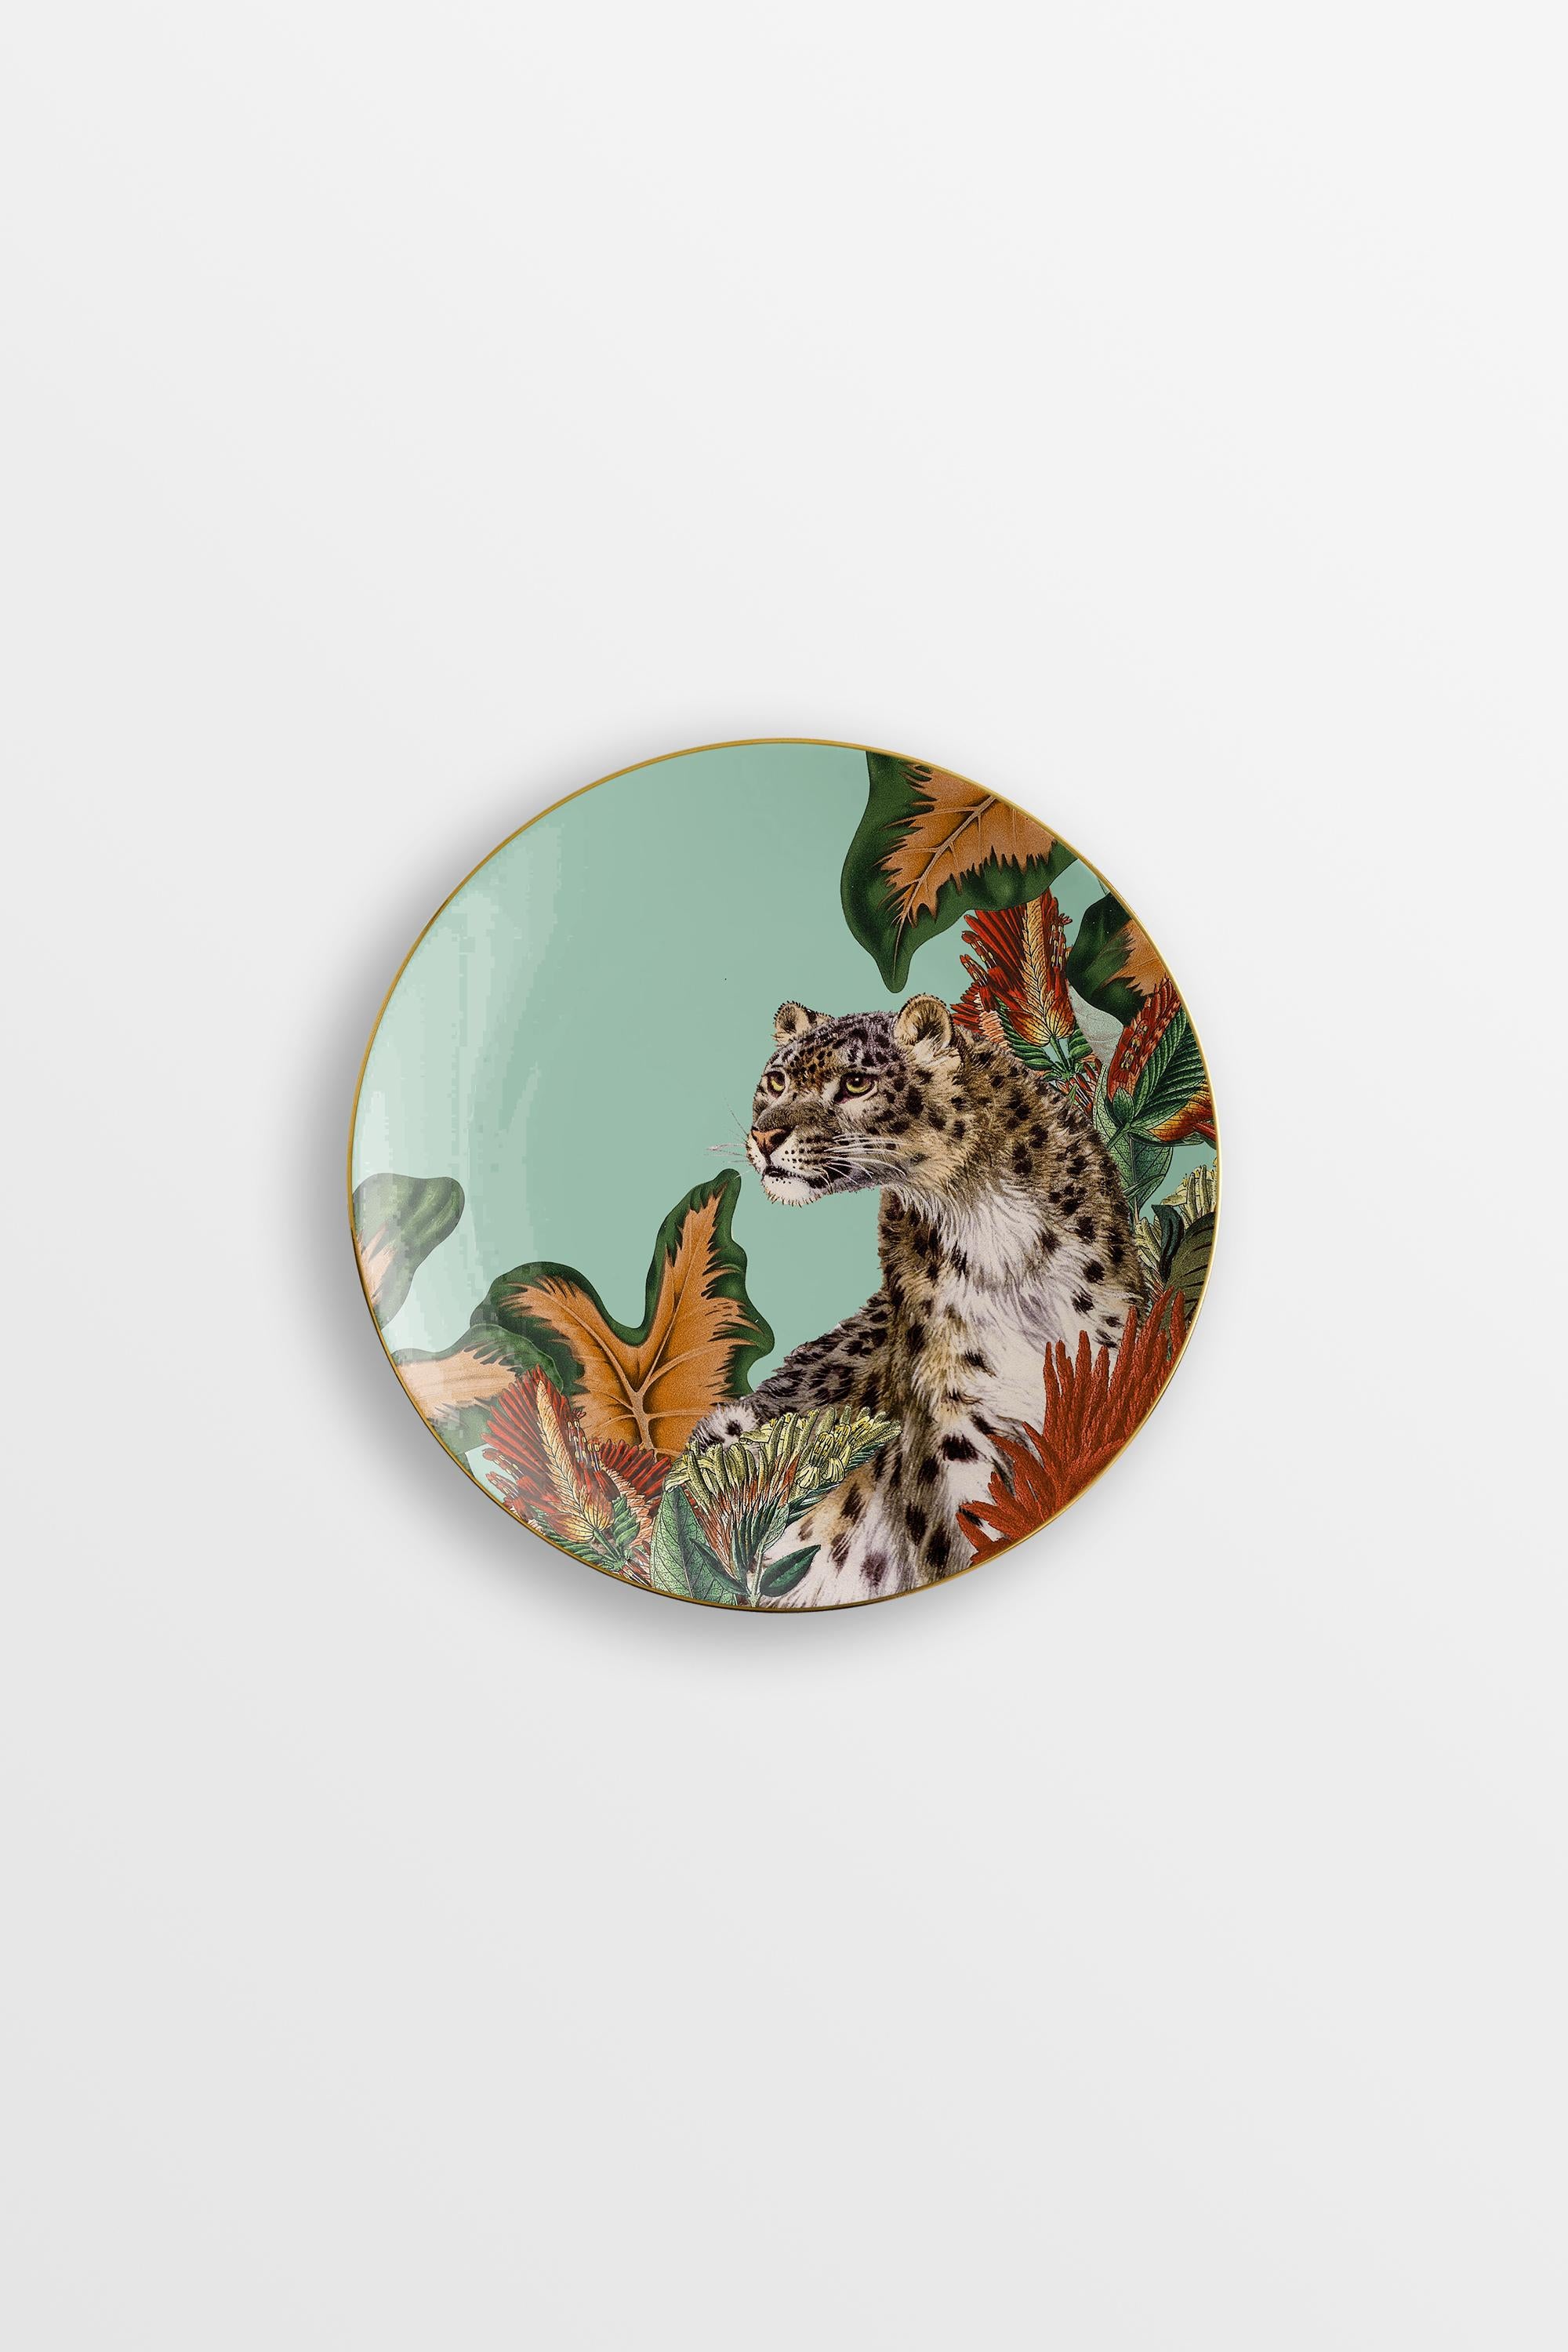 Inspired by the highest mountain of the Alps, the Mont Blanc, this collection of plates is a photography of the changing seasons. Winter is here and all the animals of the woods are enjoying the glazing air, playing hide and seek among the